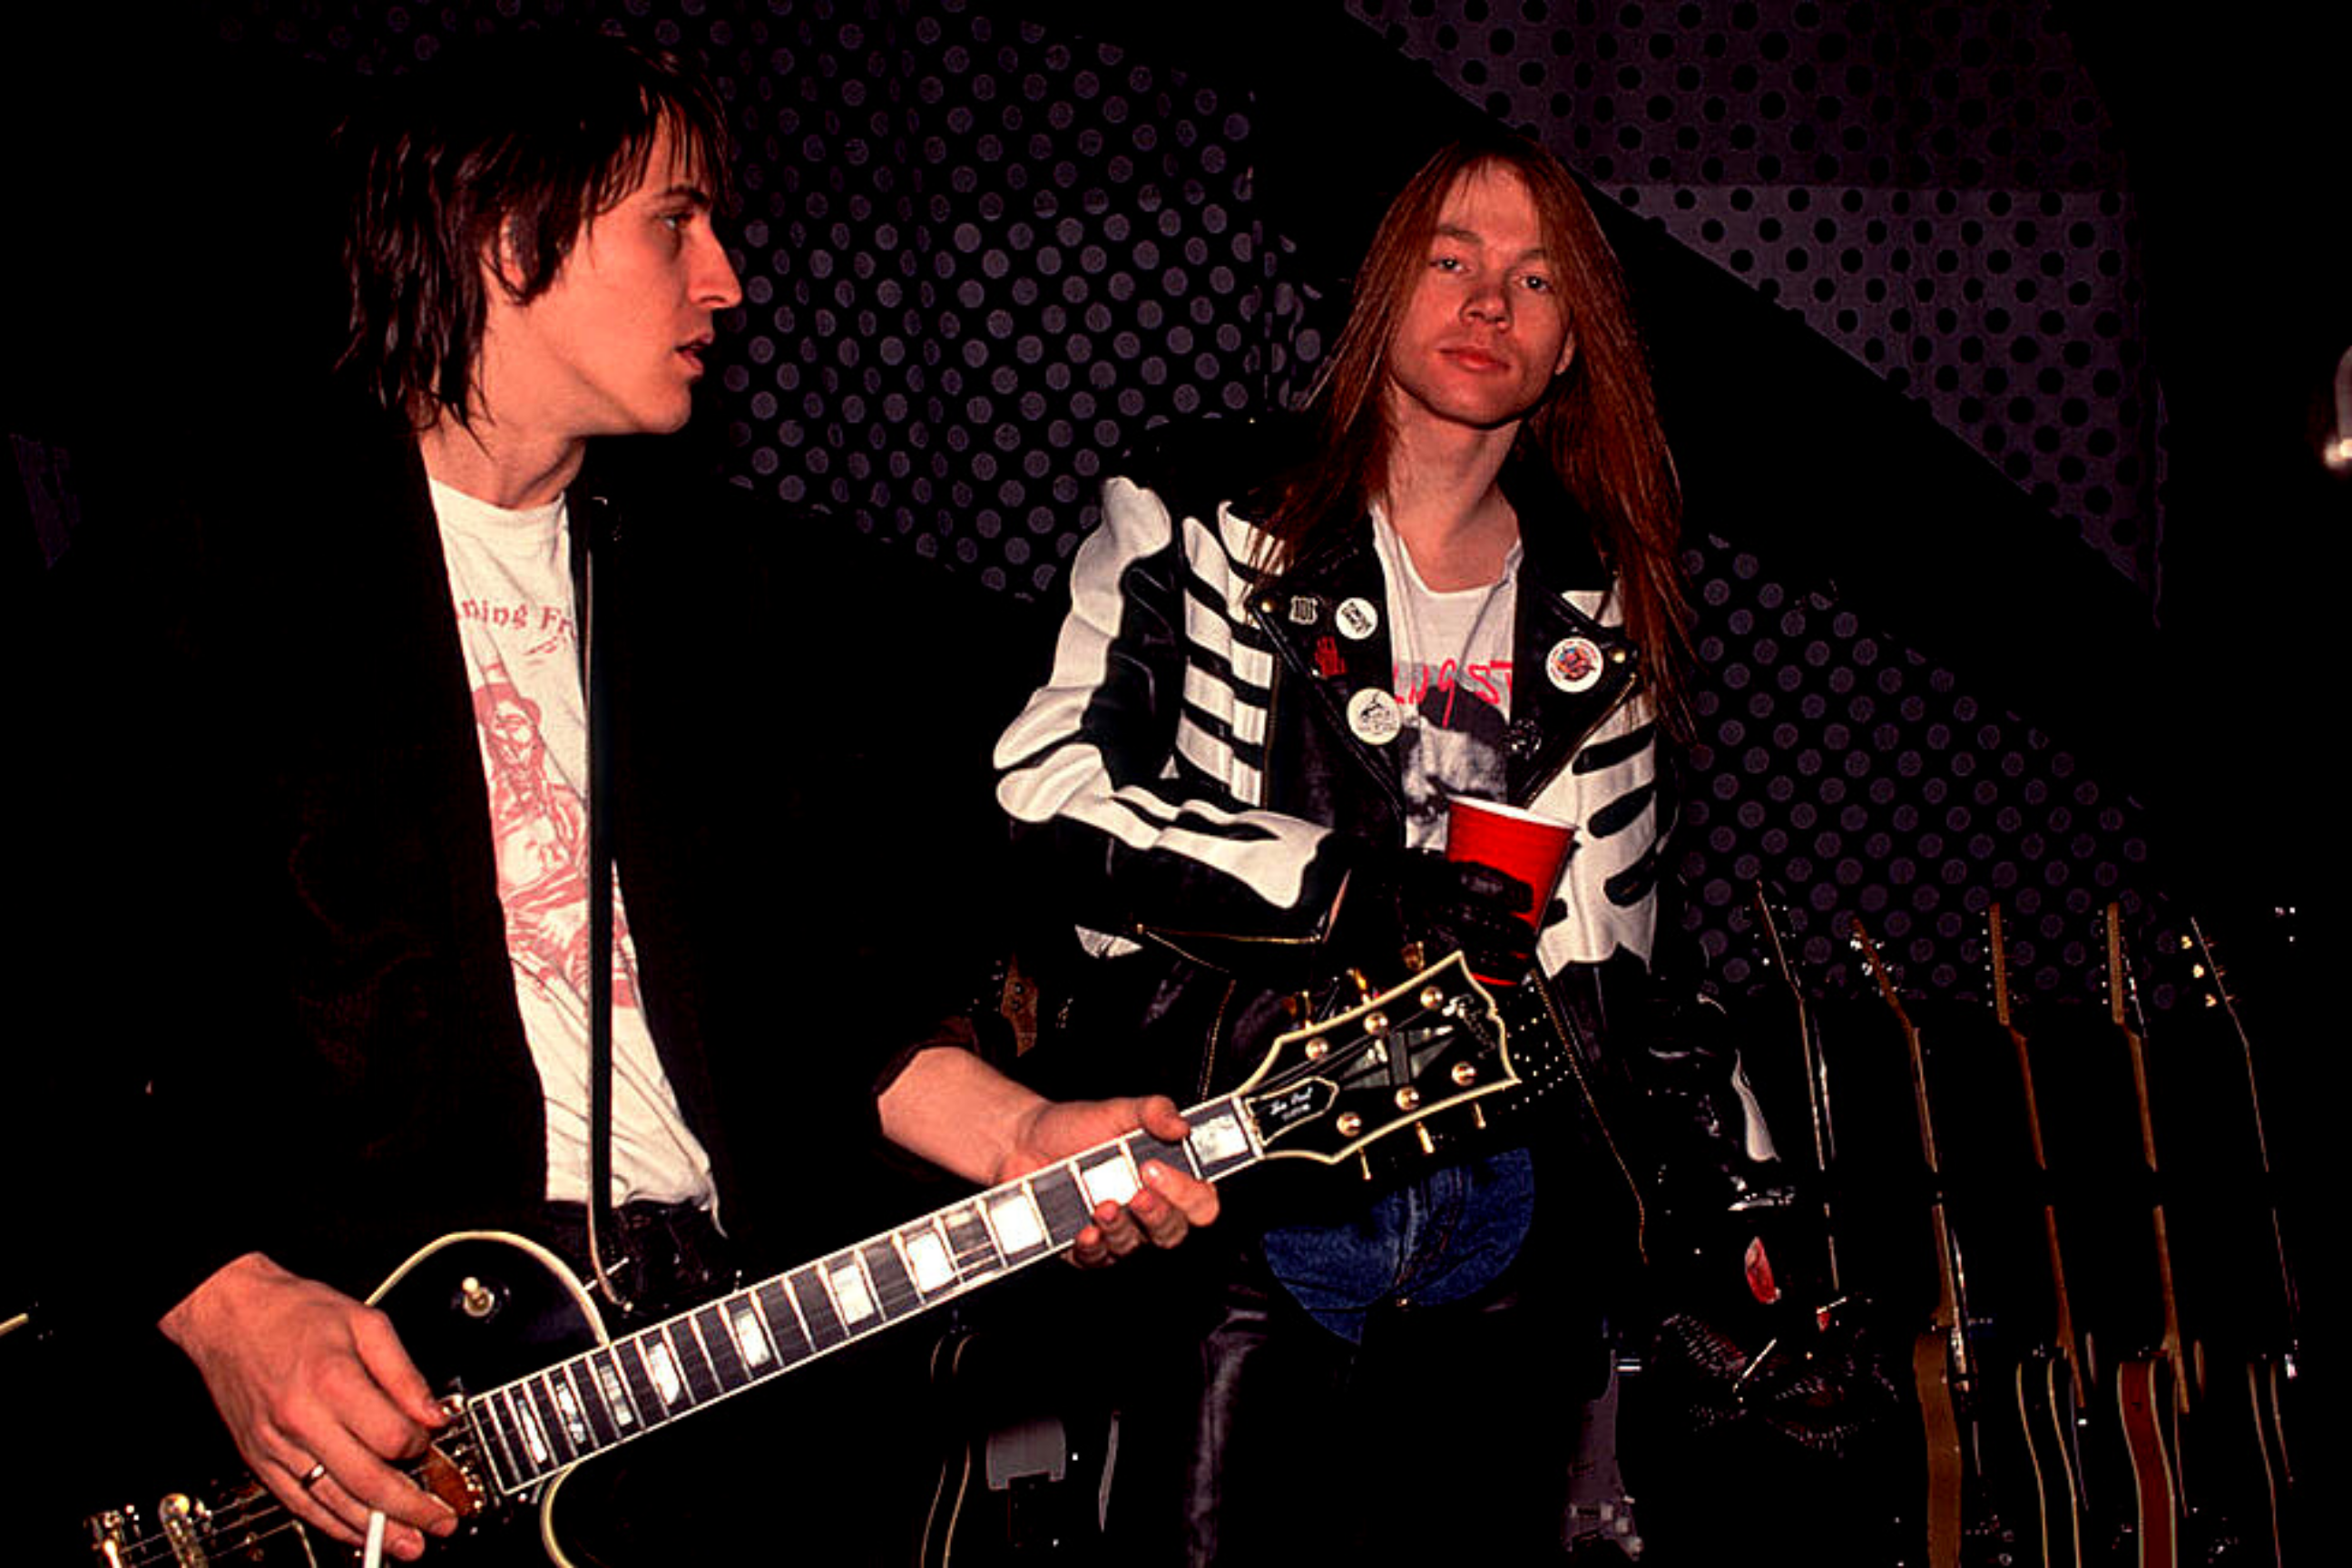 Izzy Stradlin holds a cigarette and plays his guitar while Axl Rose stares beyond the camera.